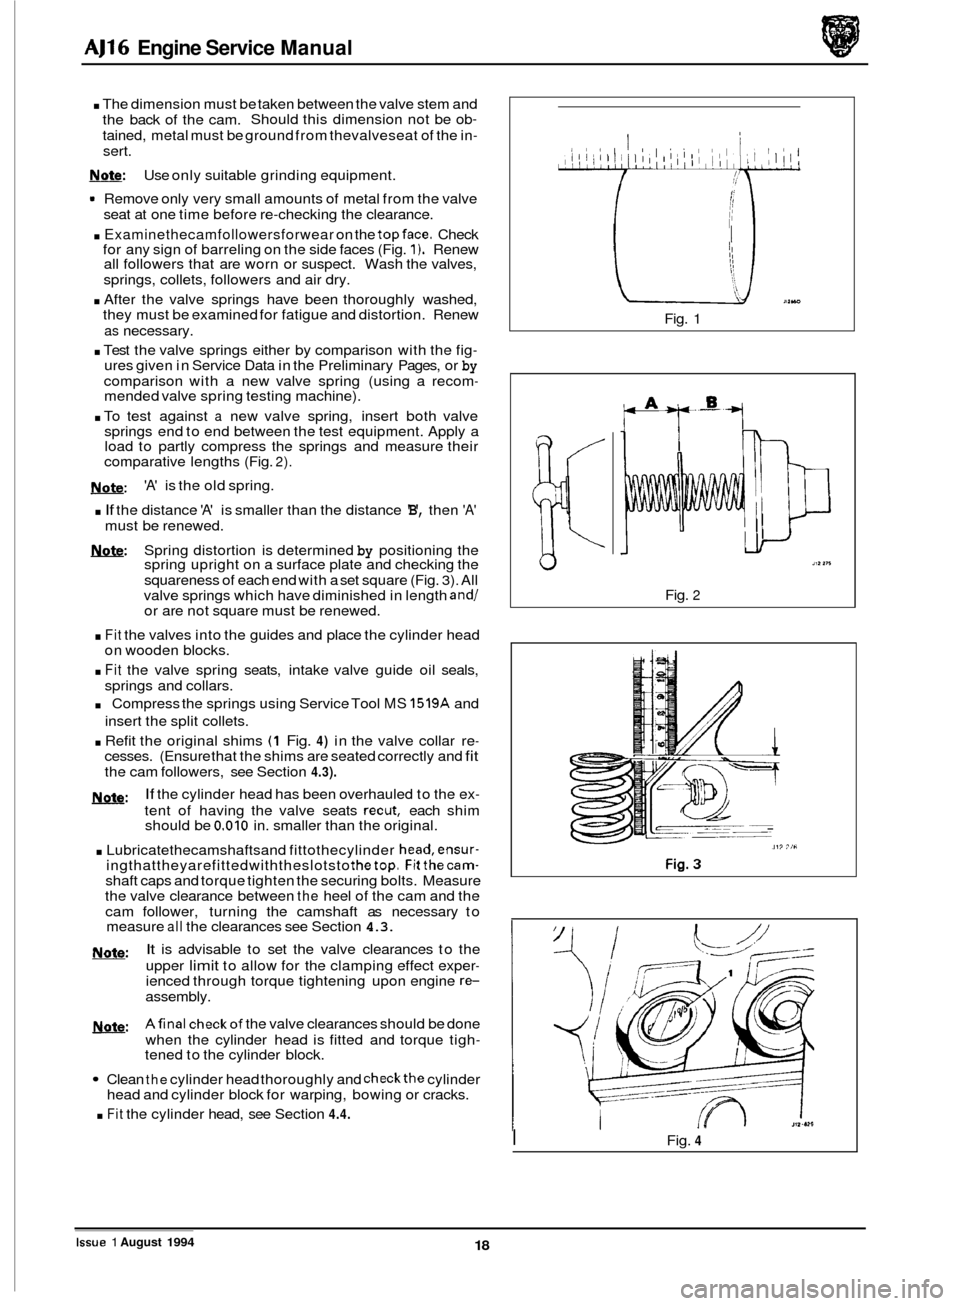 JAGUAR XJ 1994 2.G AJ16 Engine Manual AJ16 Engine Service  Manual 
. The dimension must be  taken between the valve stem and 
the  back  of the  cam.  Should 
this dimension  not be ob- 
tained,  metal must  be ground  from thevalveseat  